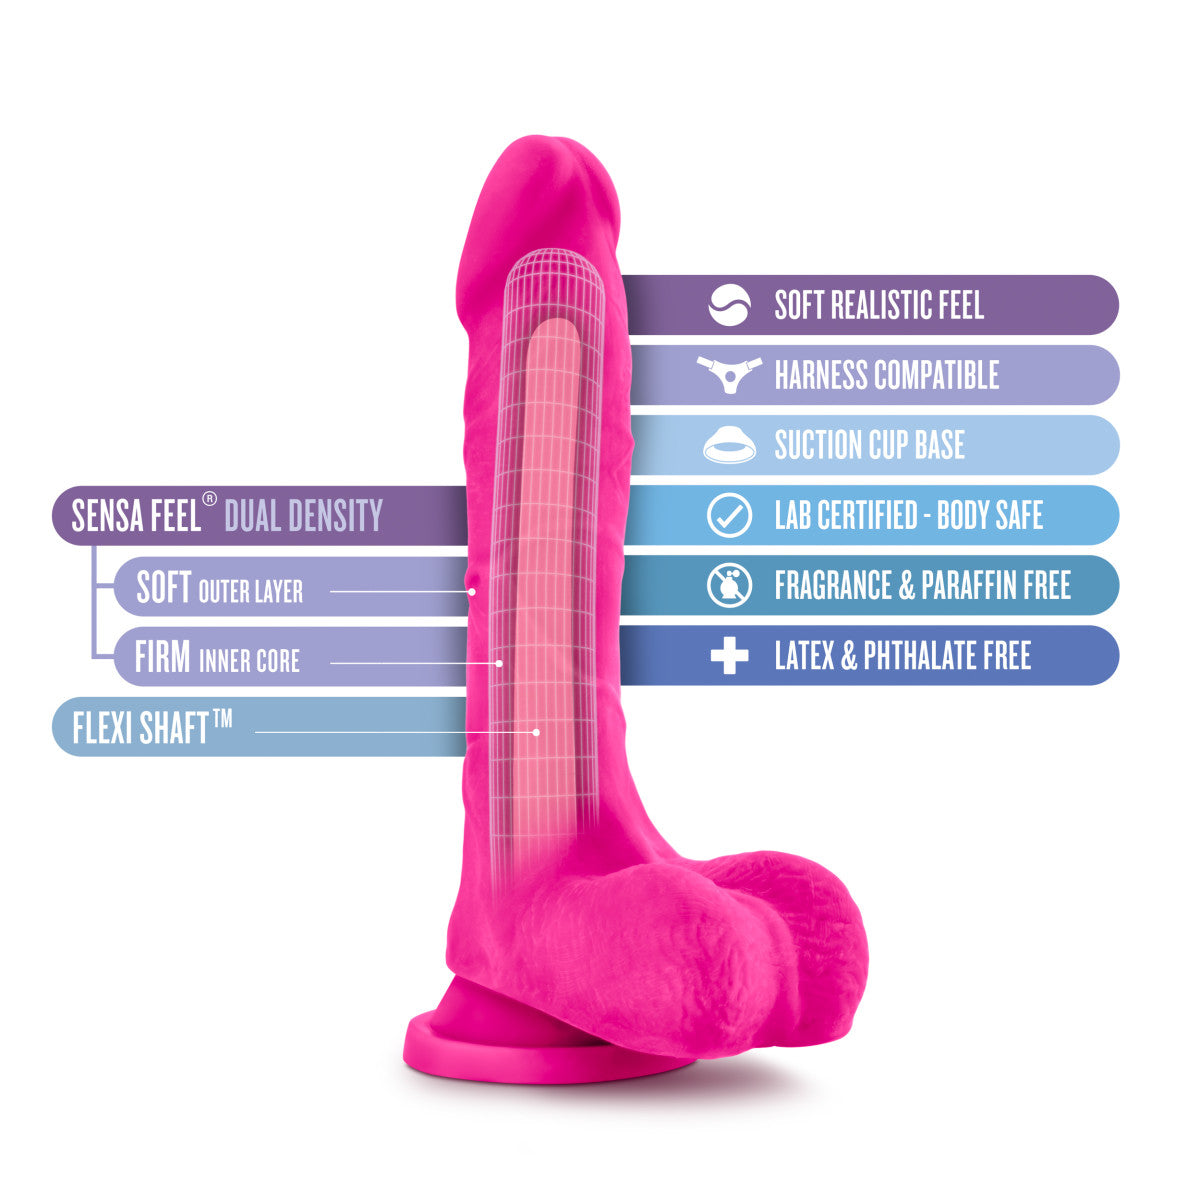 Pink realistic dildo featuring a slightly tapered head, veins along a straight but flexible shaft, and realistic balls. Suction cup base. Additional images show alternate angles.